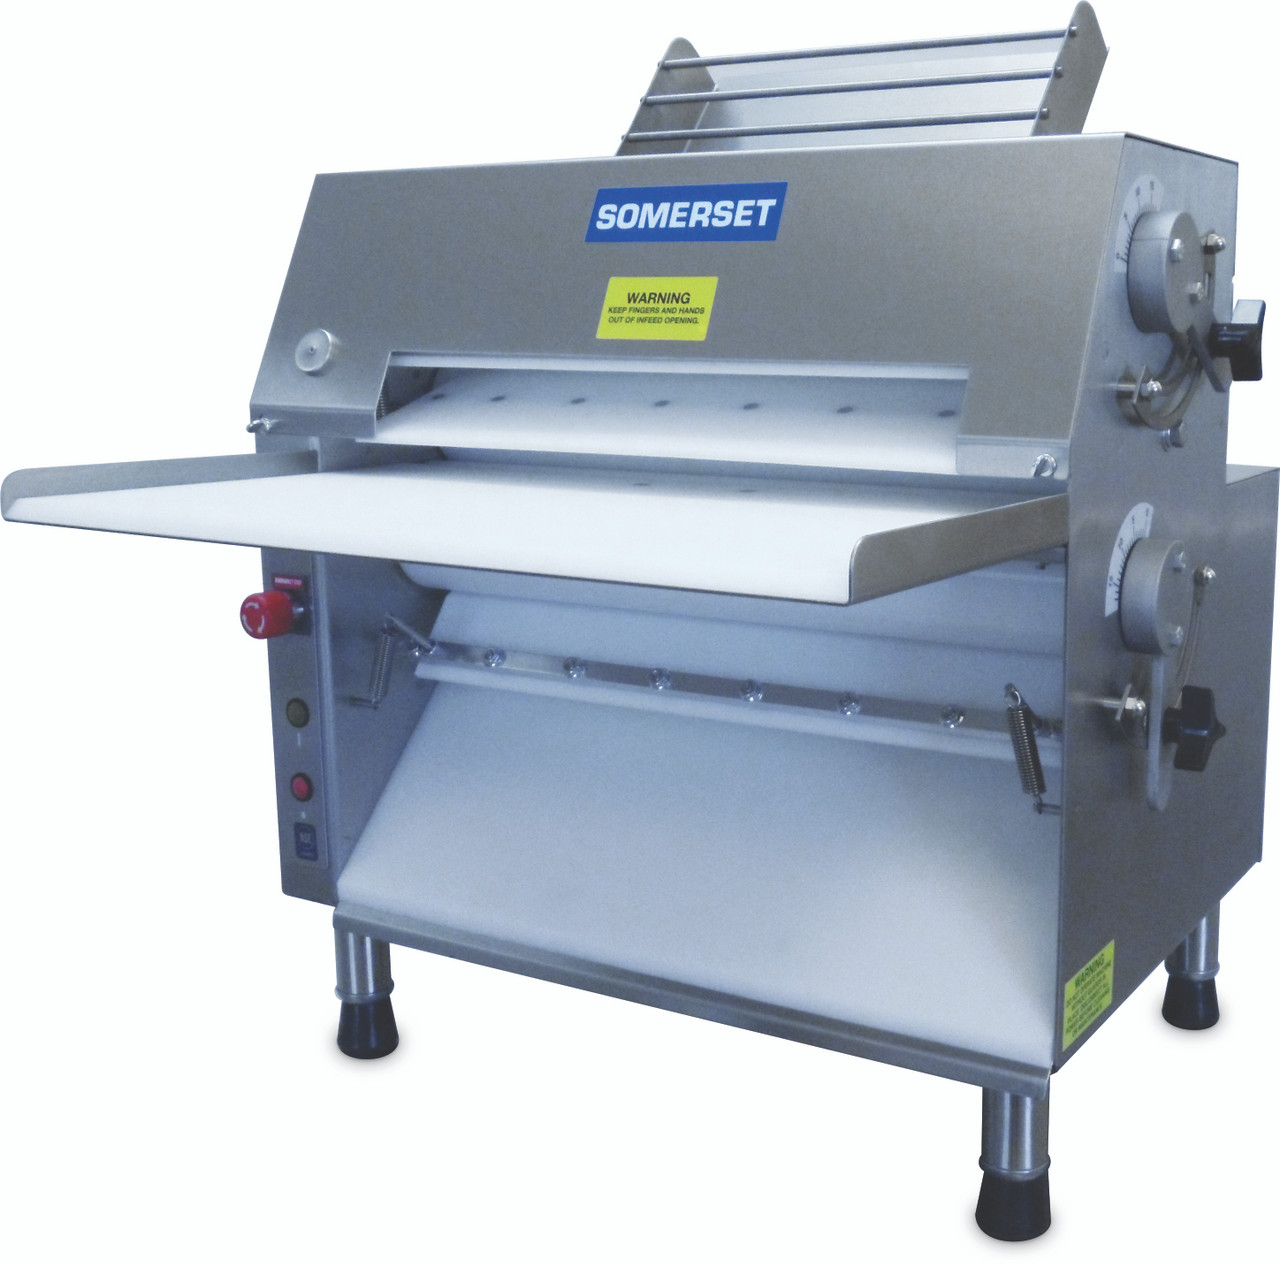 Manual dough sheeter - All industrial manufacturers